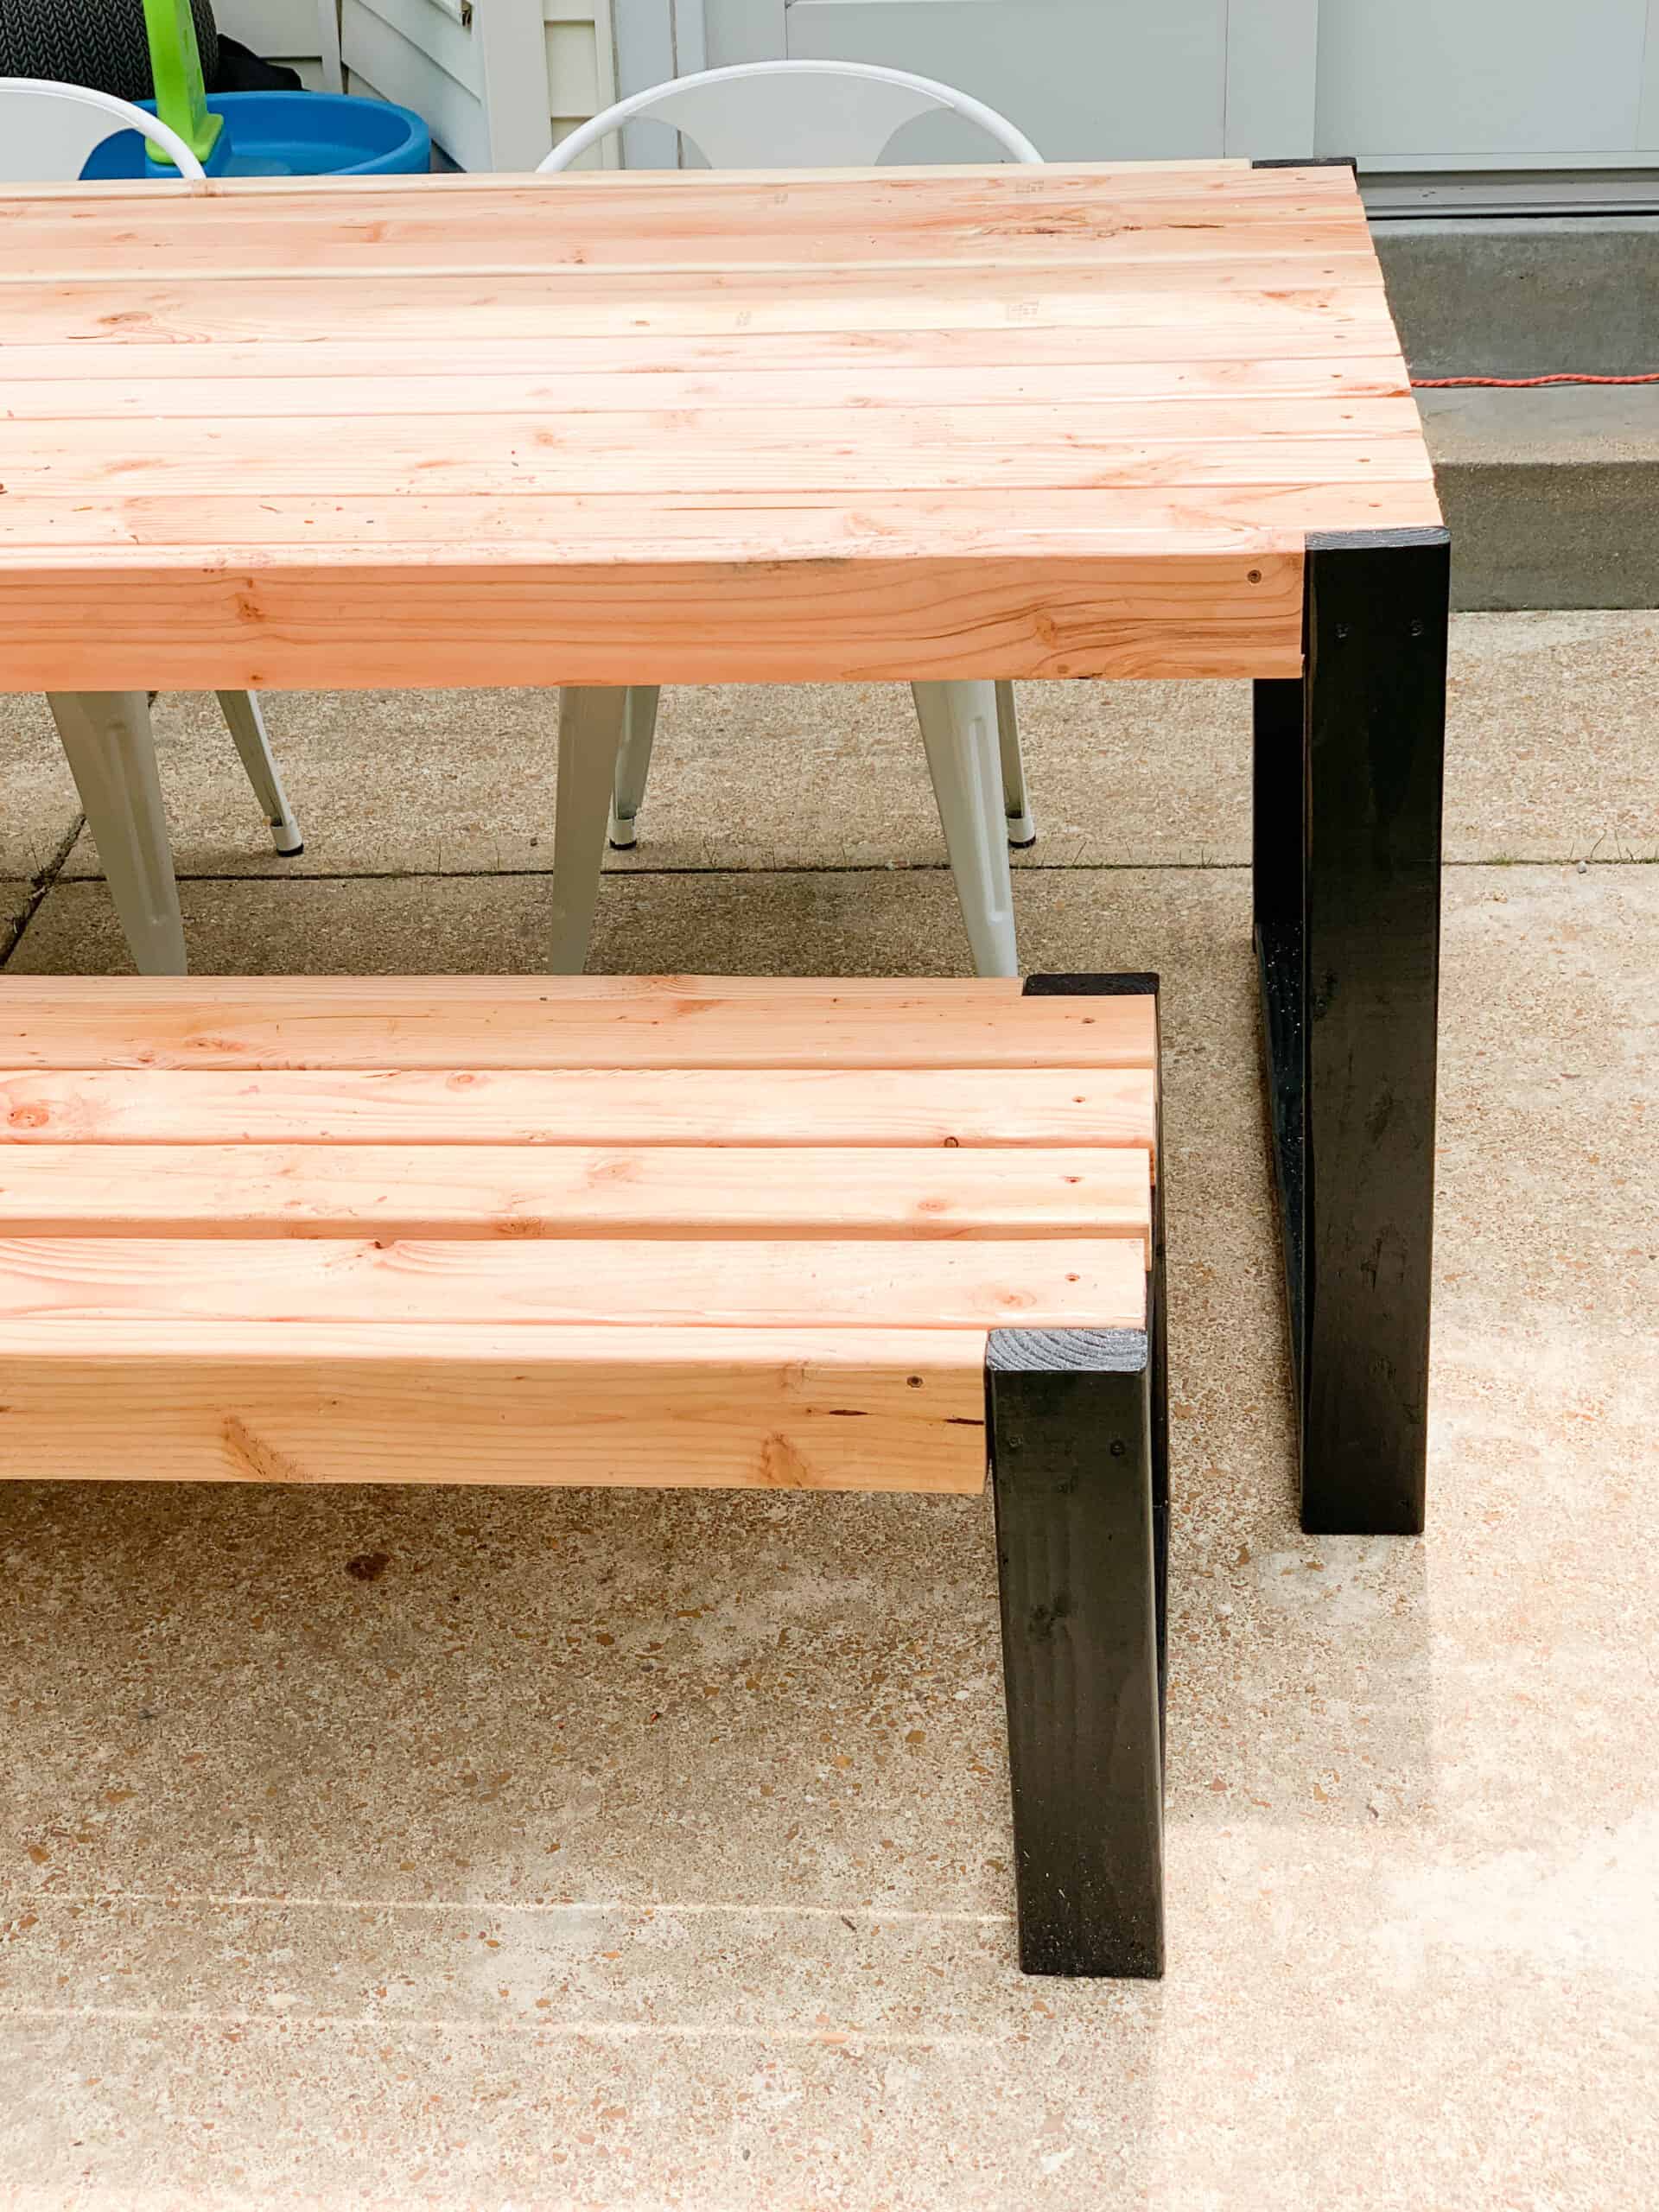 DIY outdoor table and bench